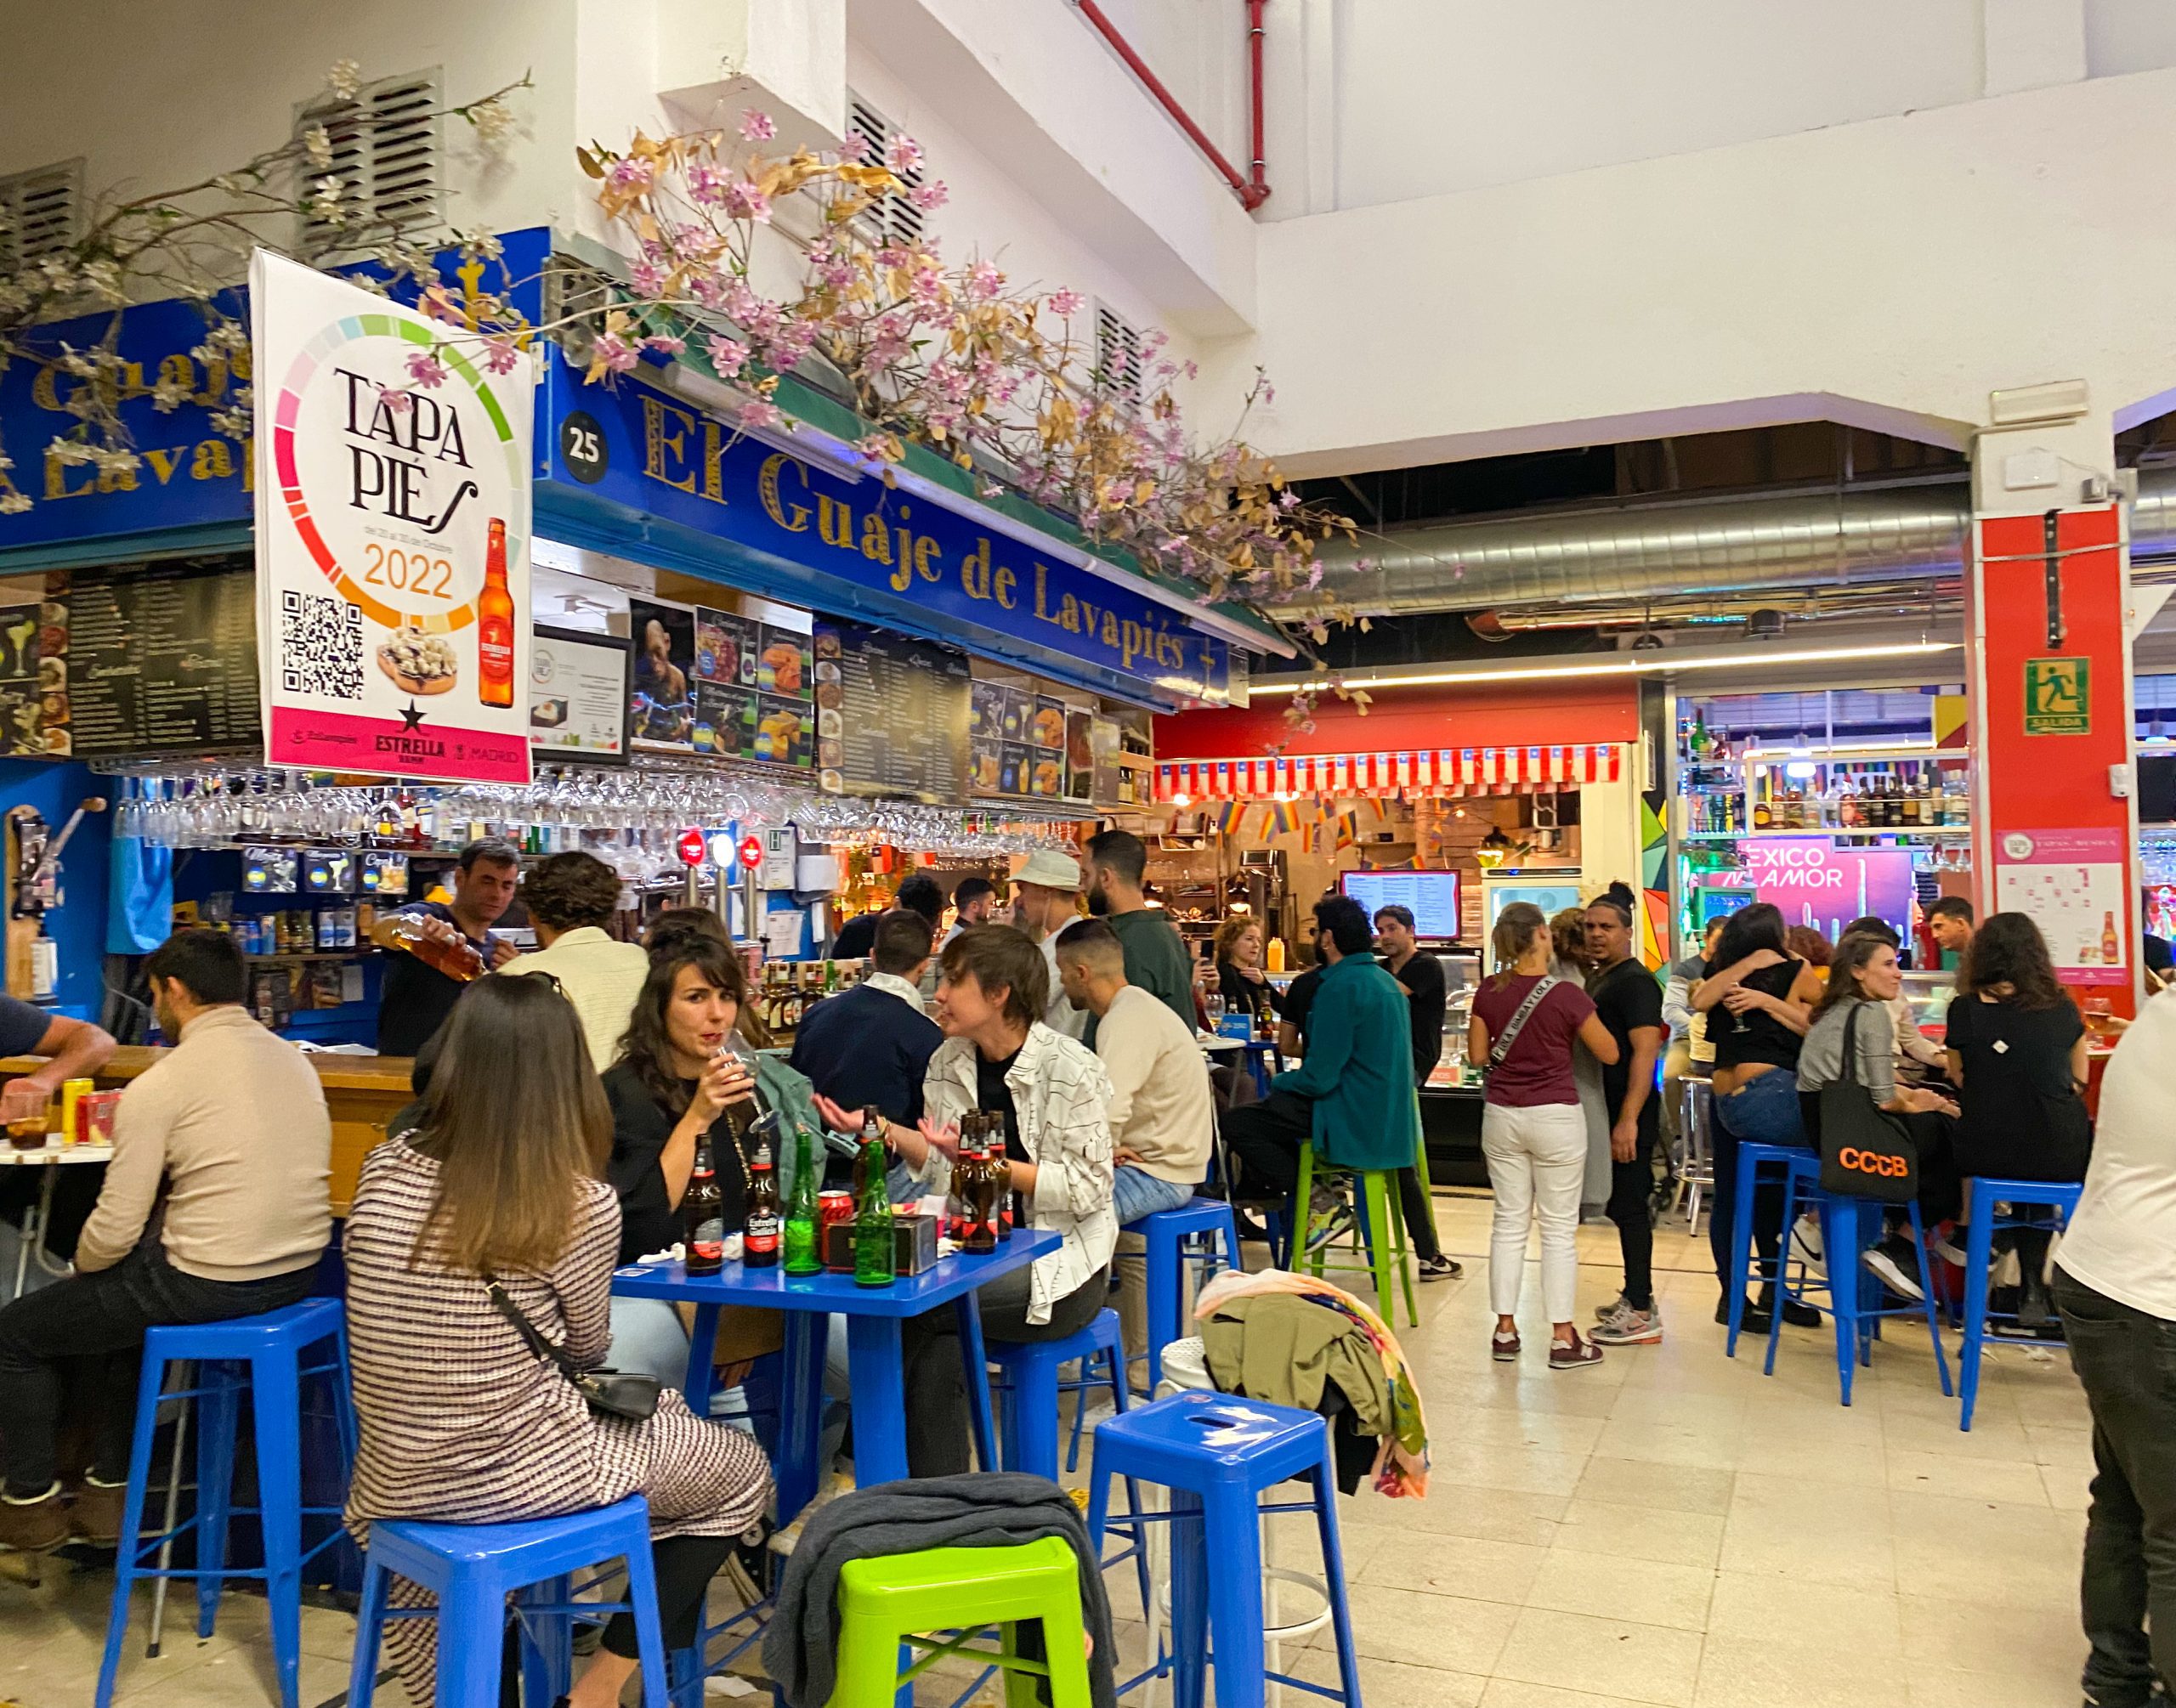 A busy food hall with people queuing at a bar for drinks and other people chatting on high stools clustered around tables.